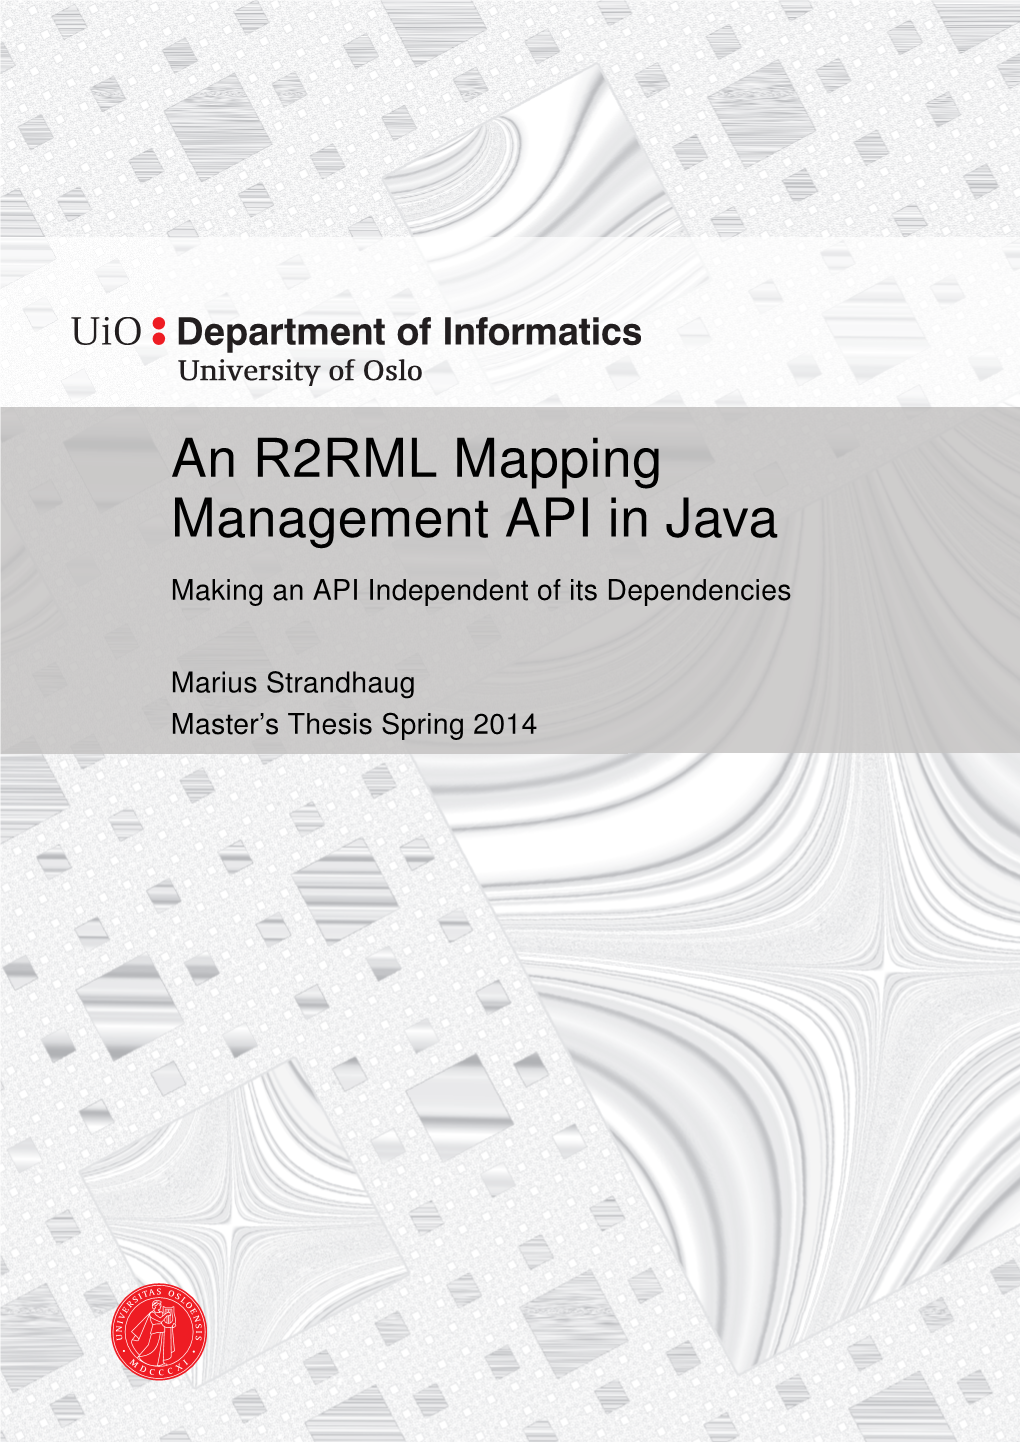 An R2RML Mapping Management API in Java